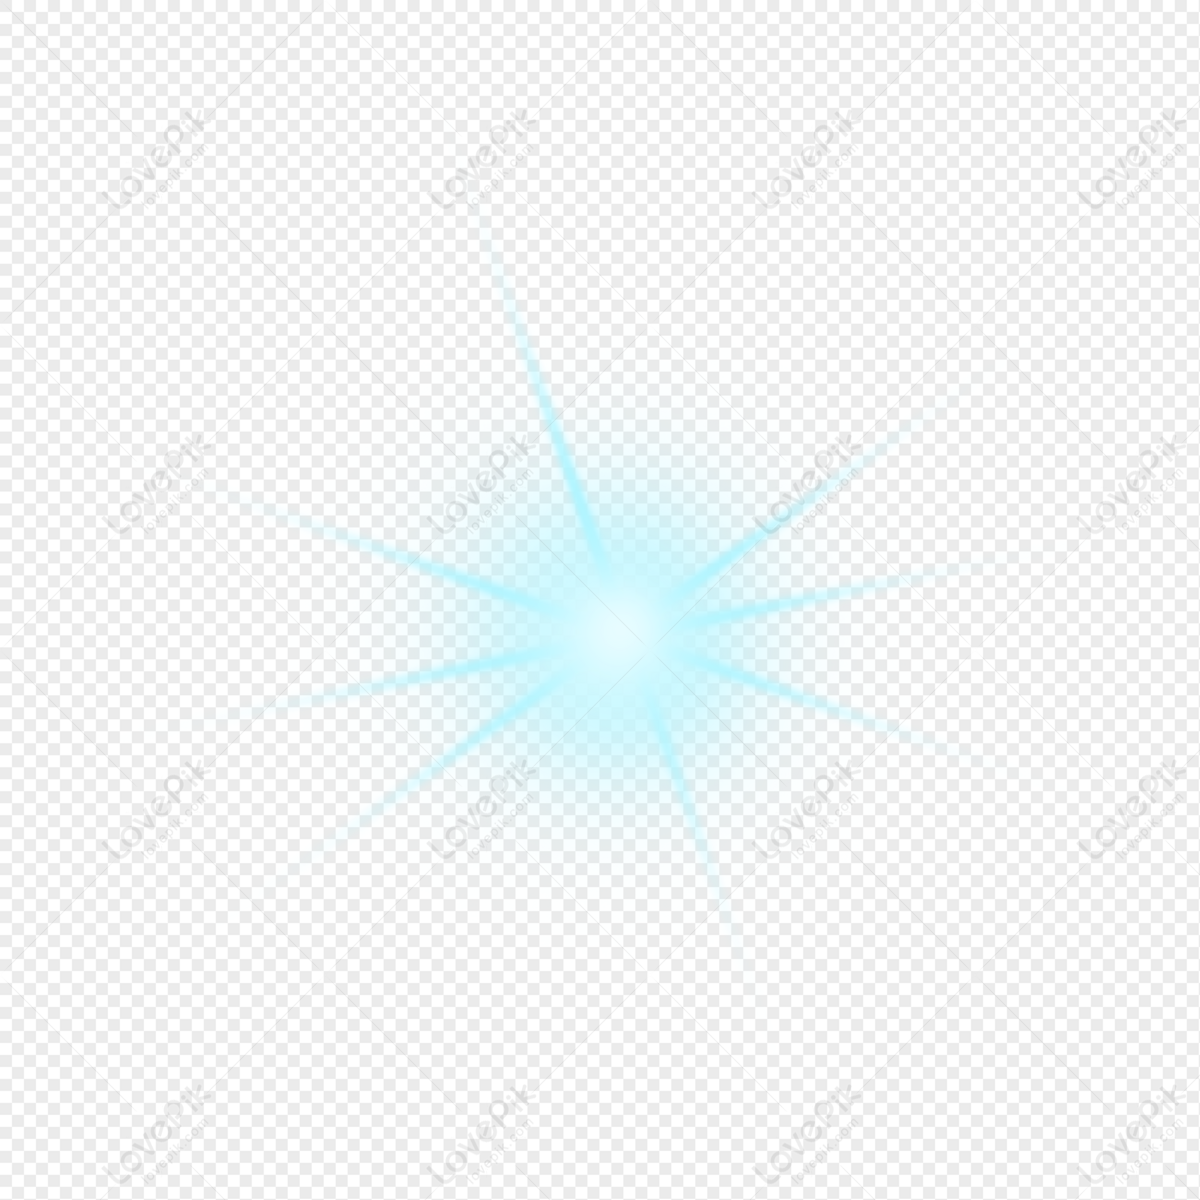 Light Blue Glow Png White Transparent And Clipart Image For Free Download -  Lovepik | 401489302